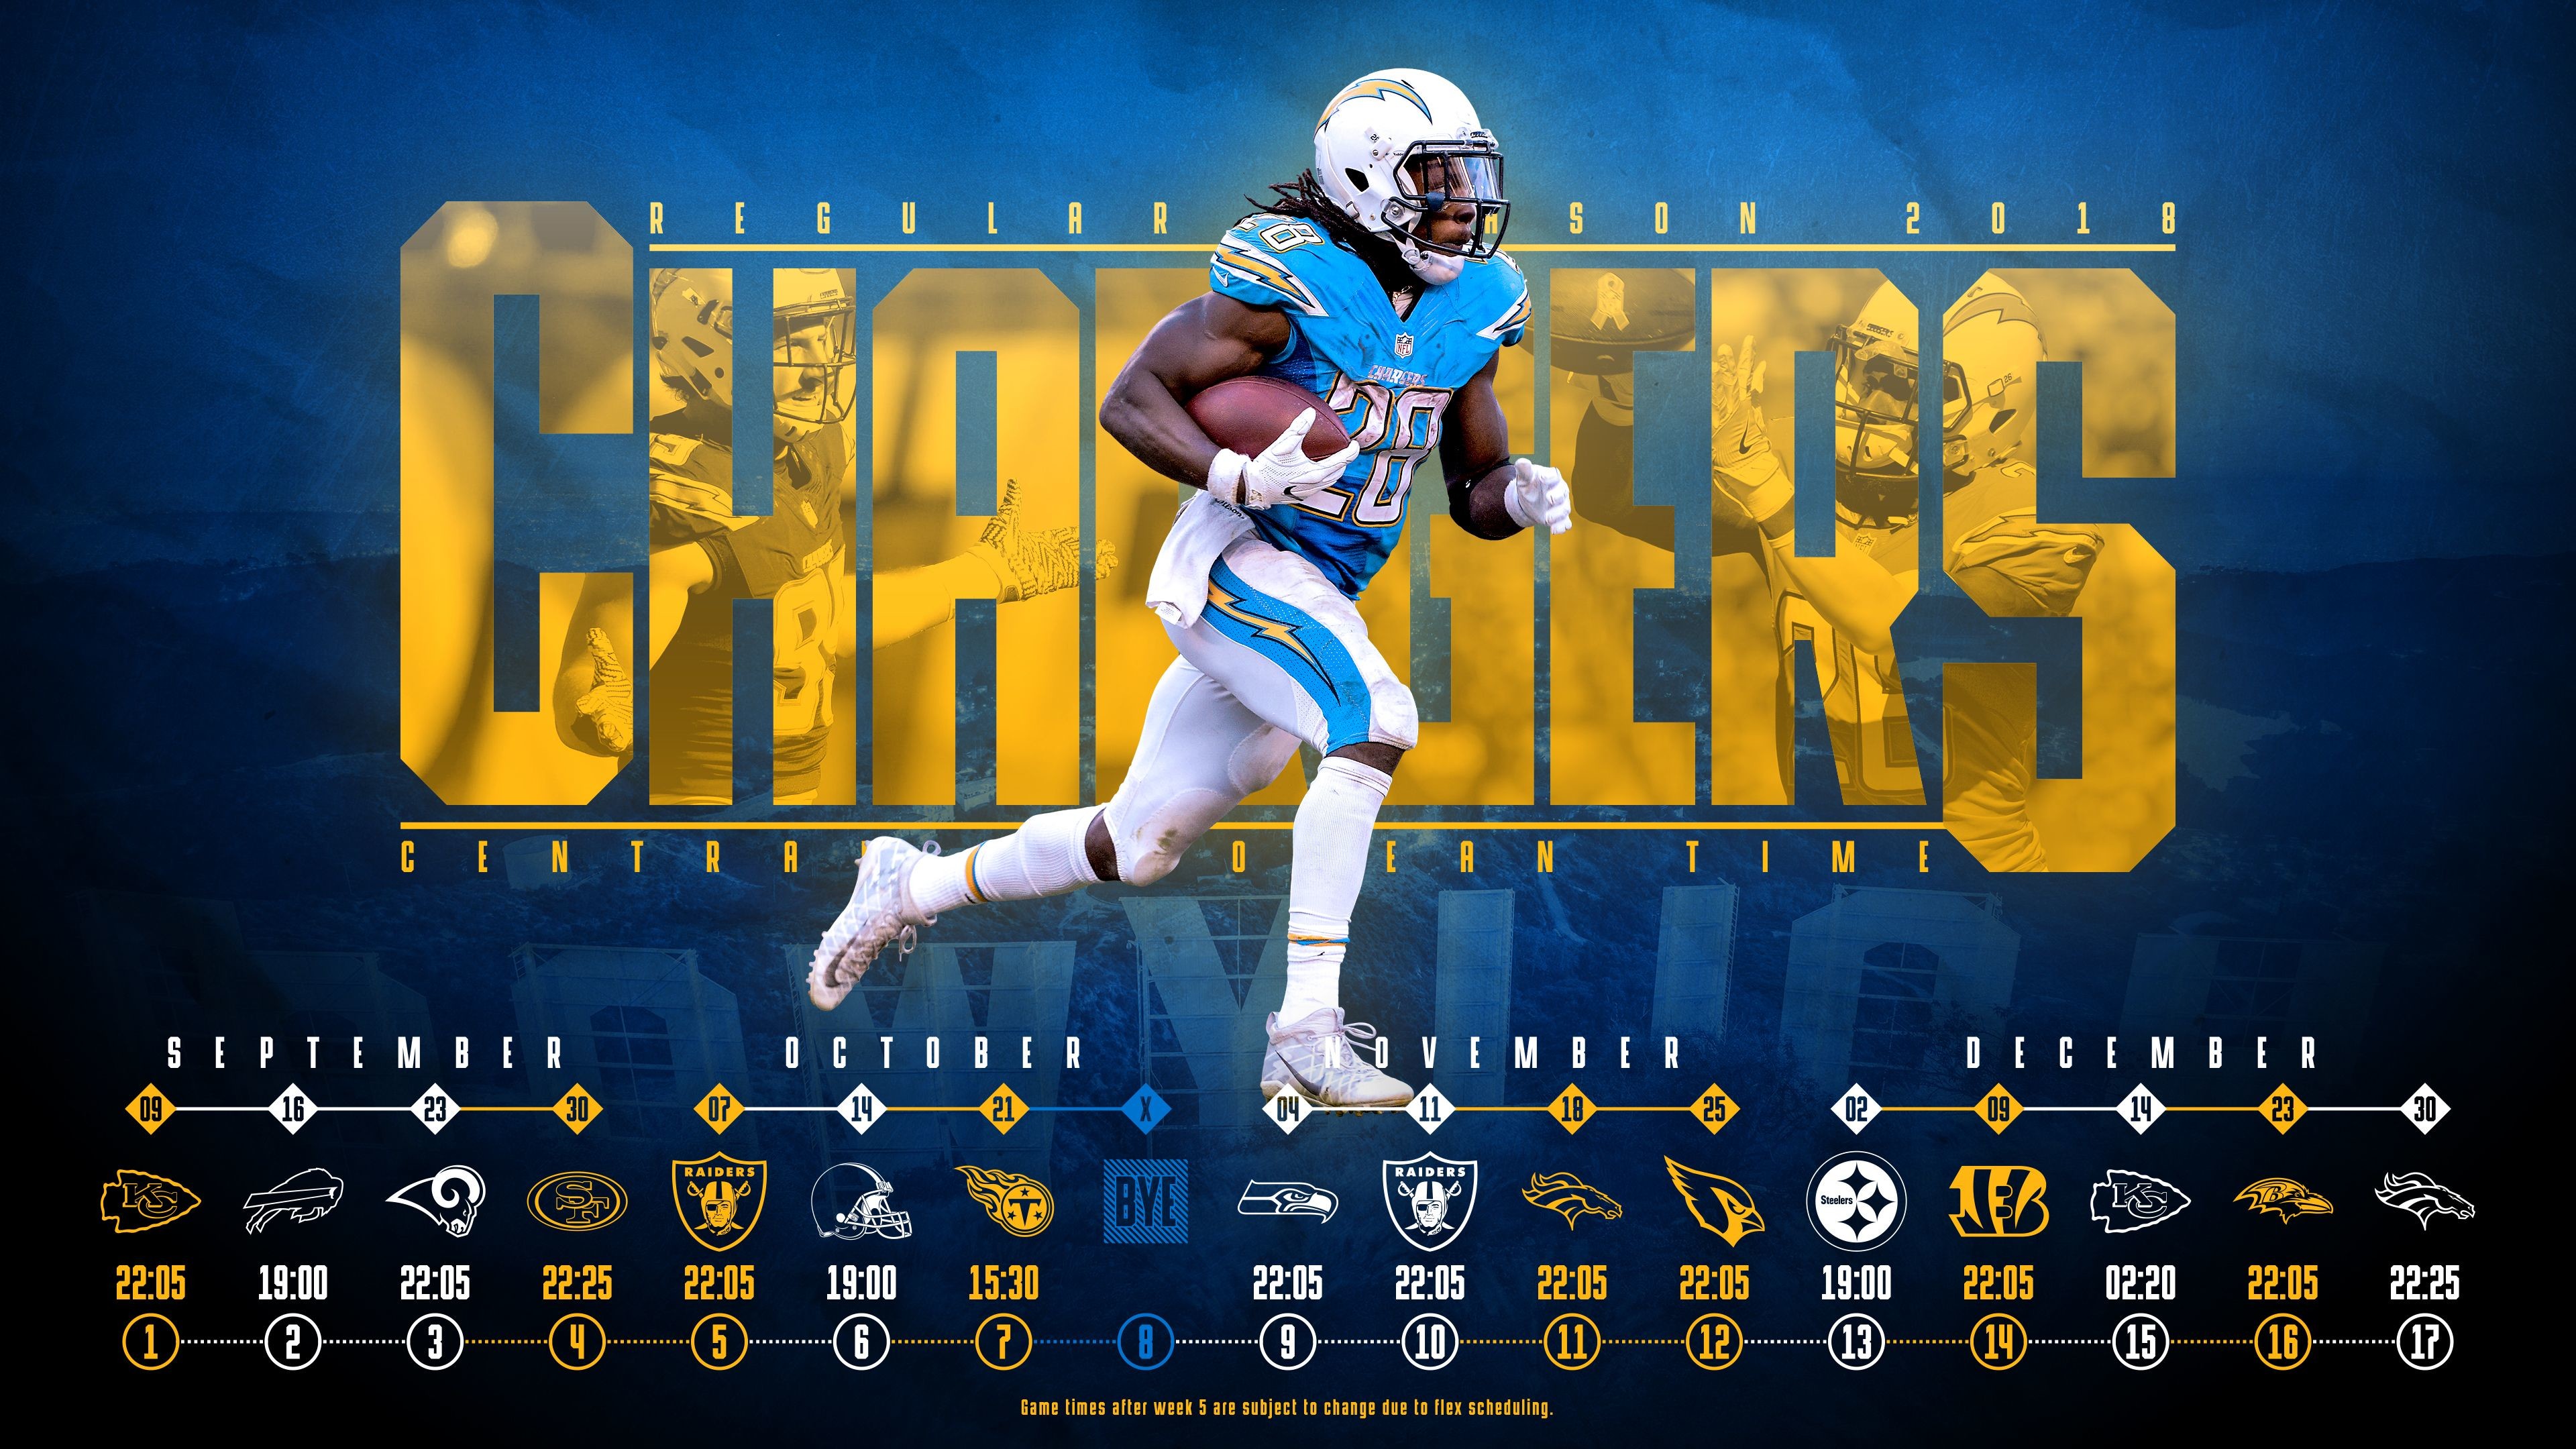 3840x2160 Schedule wallpaper for the Los Angeles Chargers Regular Season, 2018  Central European Time. Made by Tobler GergÅ #tgersdiy